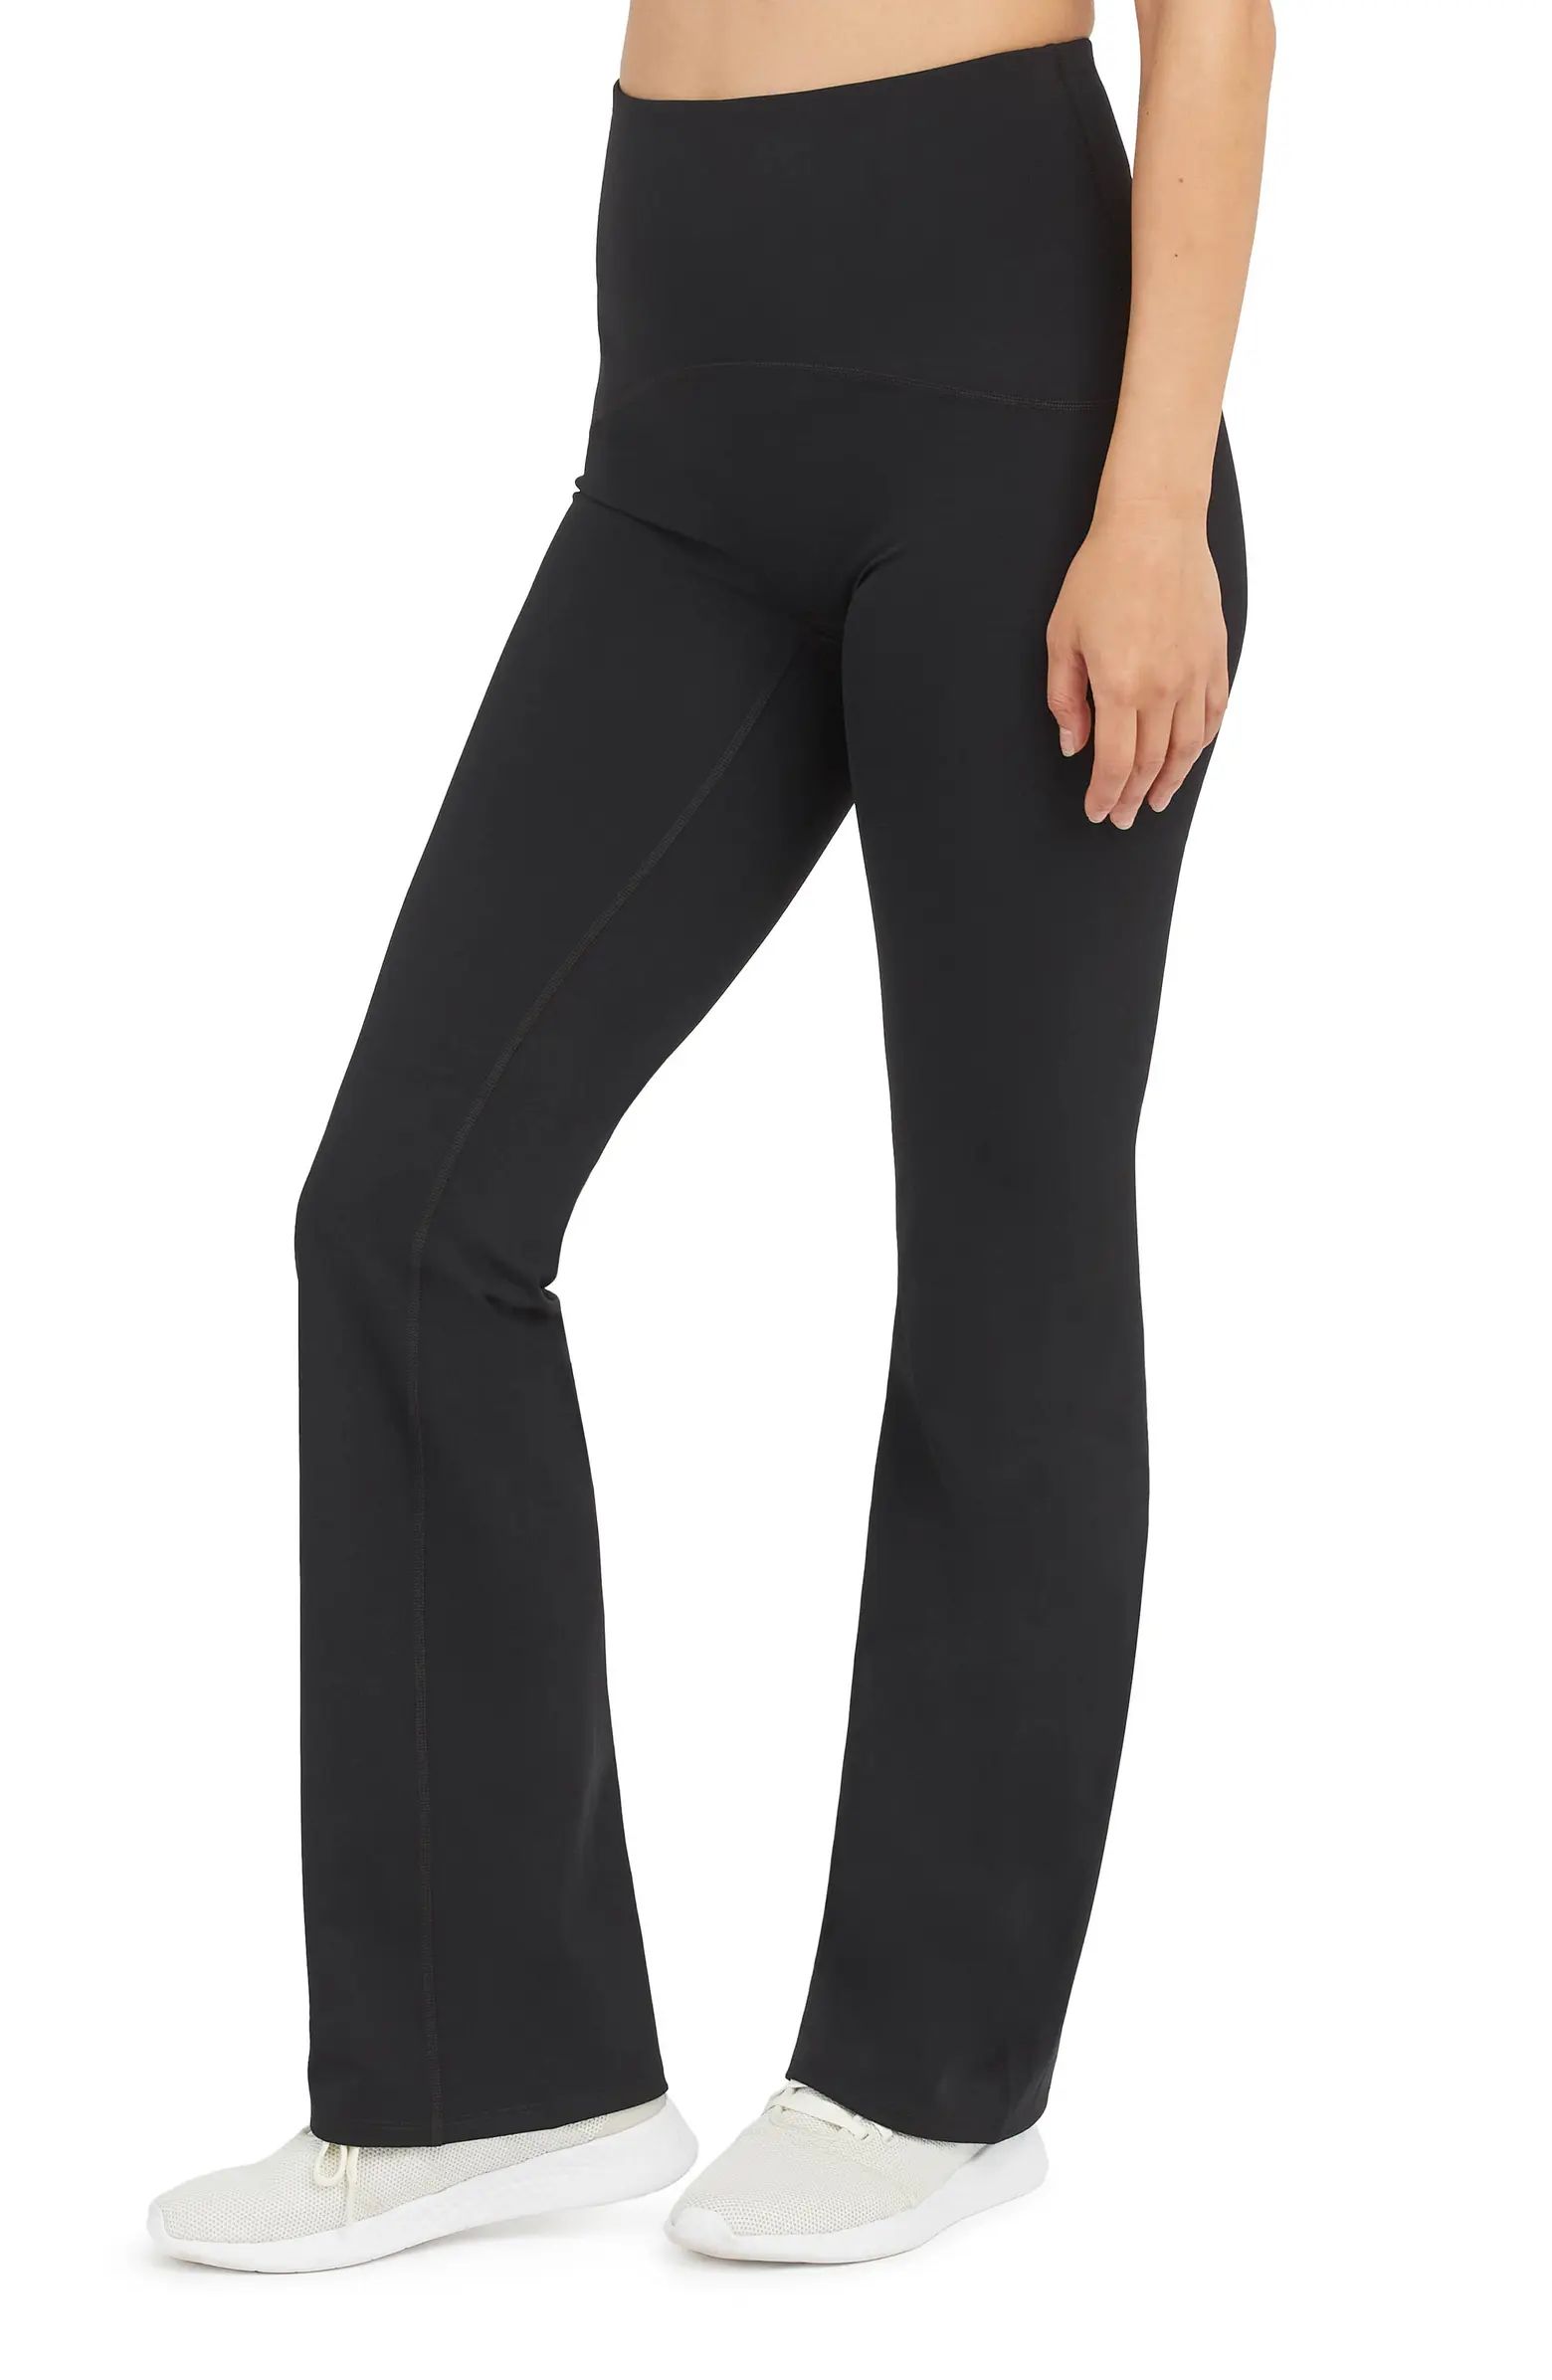 Booty Boost Yoga Pants | Nordstrom